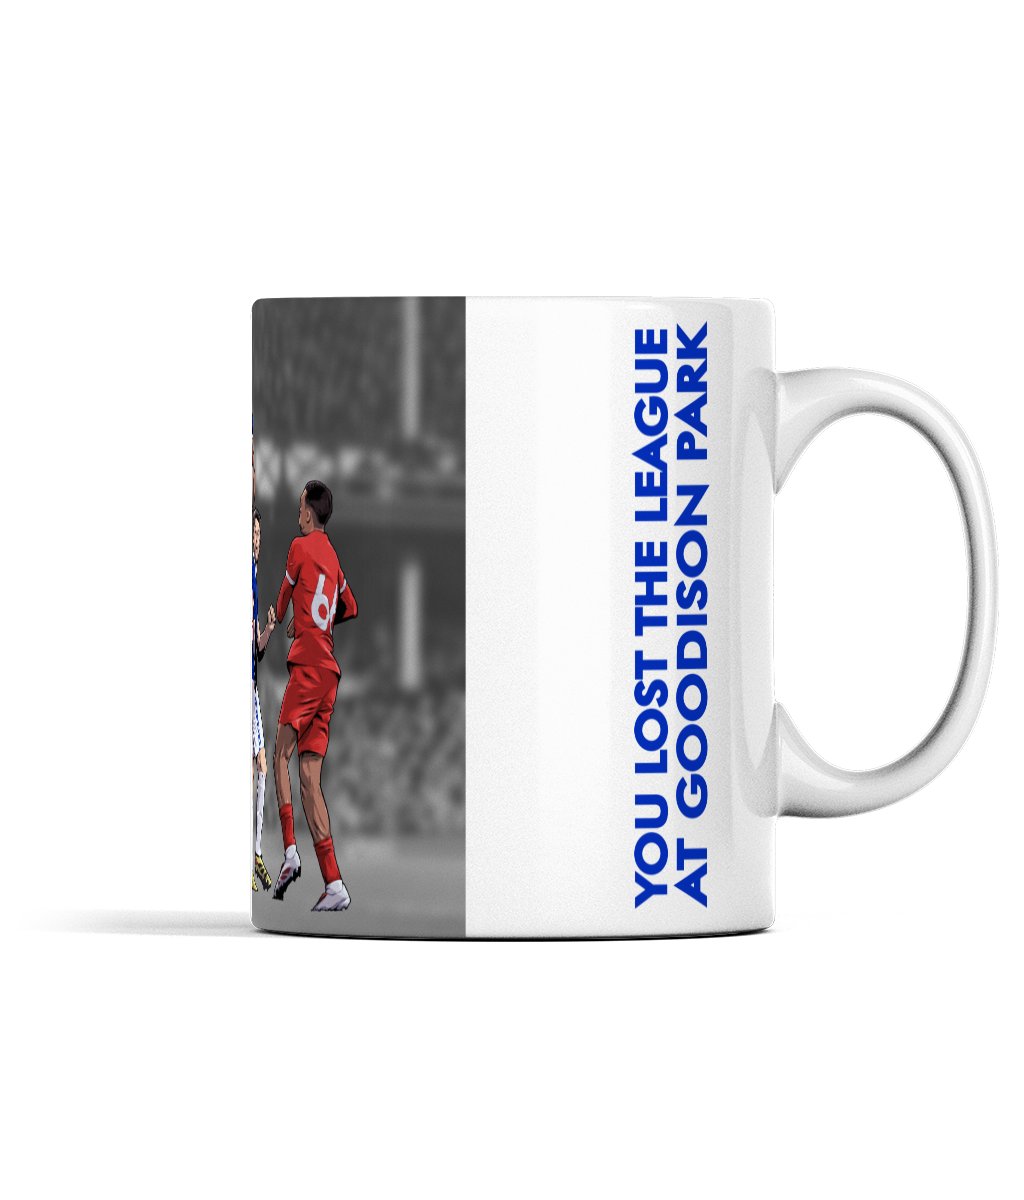 You lost the league at Goodison Park, mugs available now! 🔥

Link below, please RT